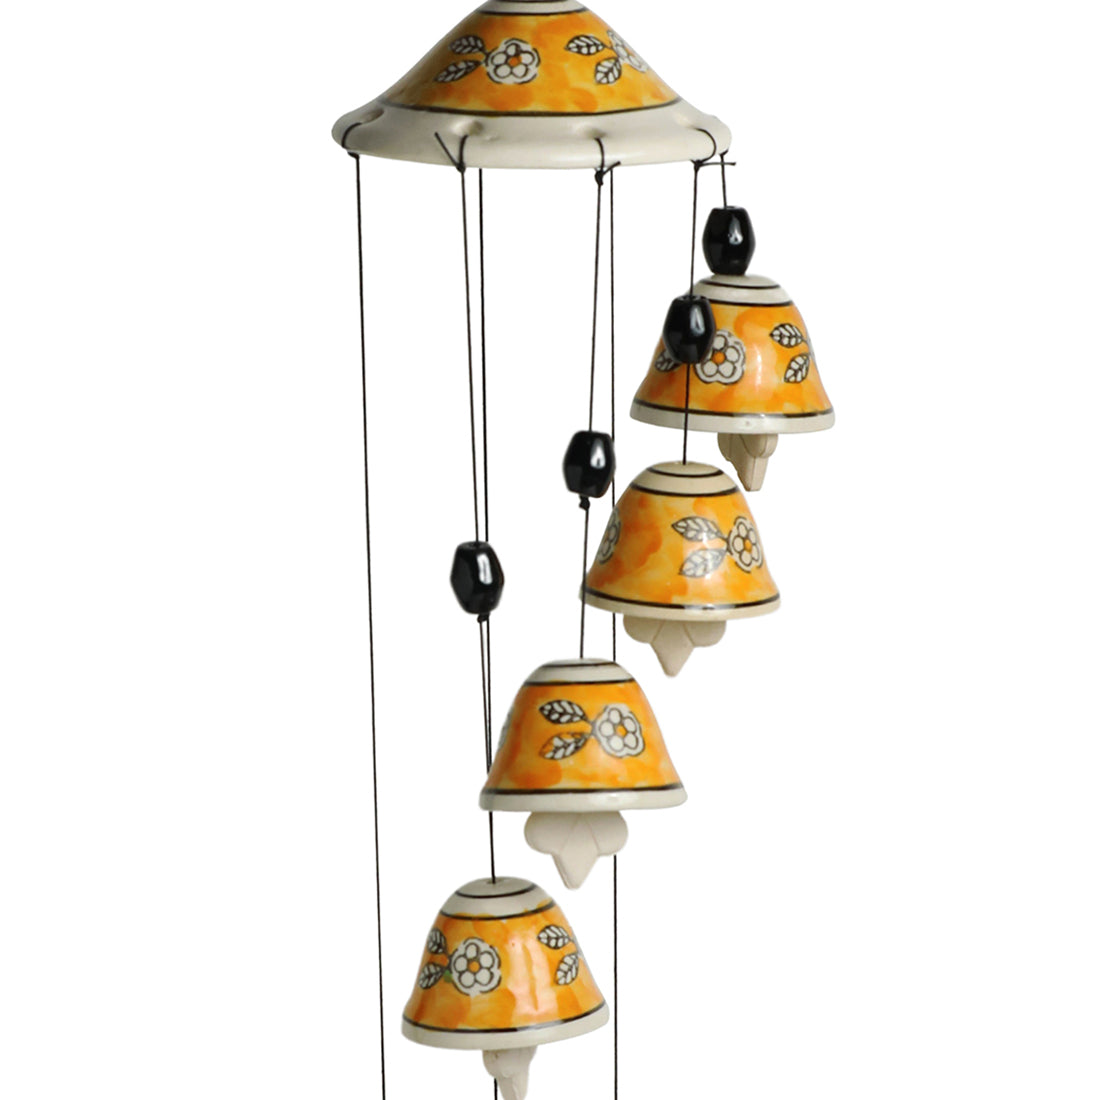 ExclusiveLane 'Breezy Chiming' Hand-Painted Metal Decorative Hanging Bells  Wind Chimes for Home Décor, Balcony | Wind Chimes for Outside, Outdoor